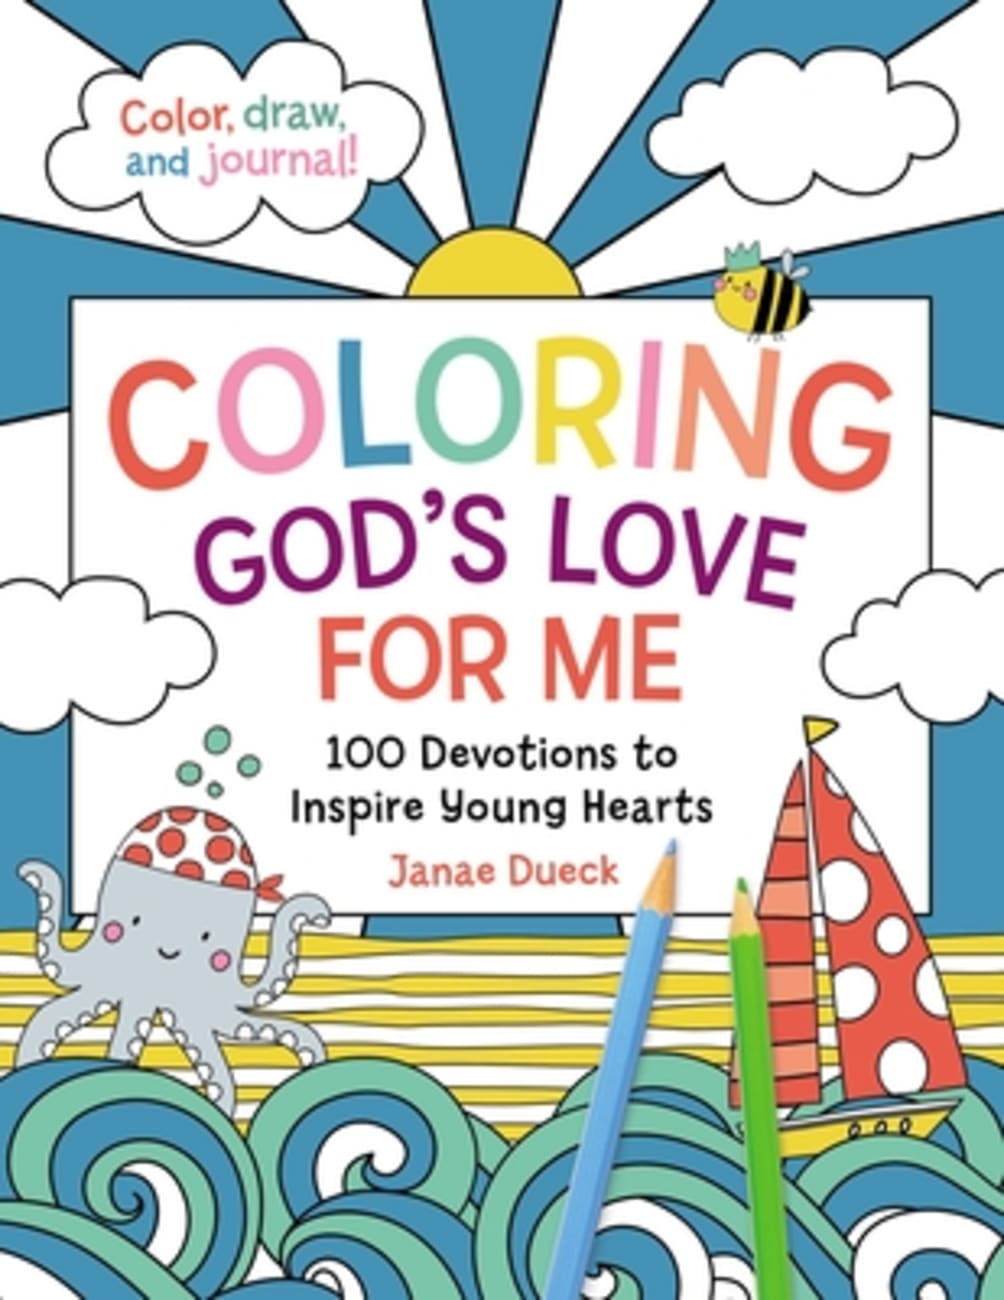 COLORING GOD'S LOVE FOR ME: 100 DEVOTIONS TO INSPIRE YOUNG HEARTS